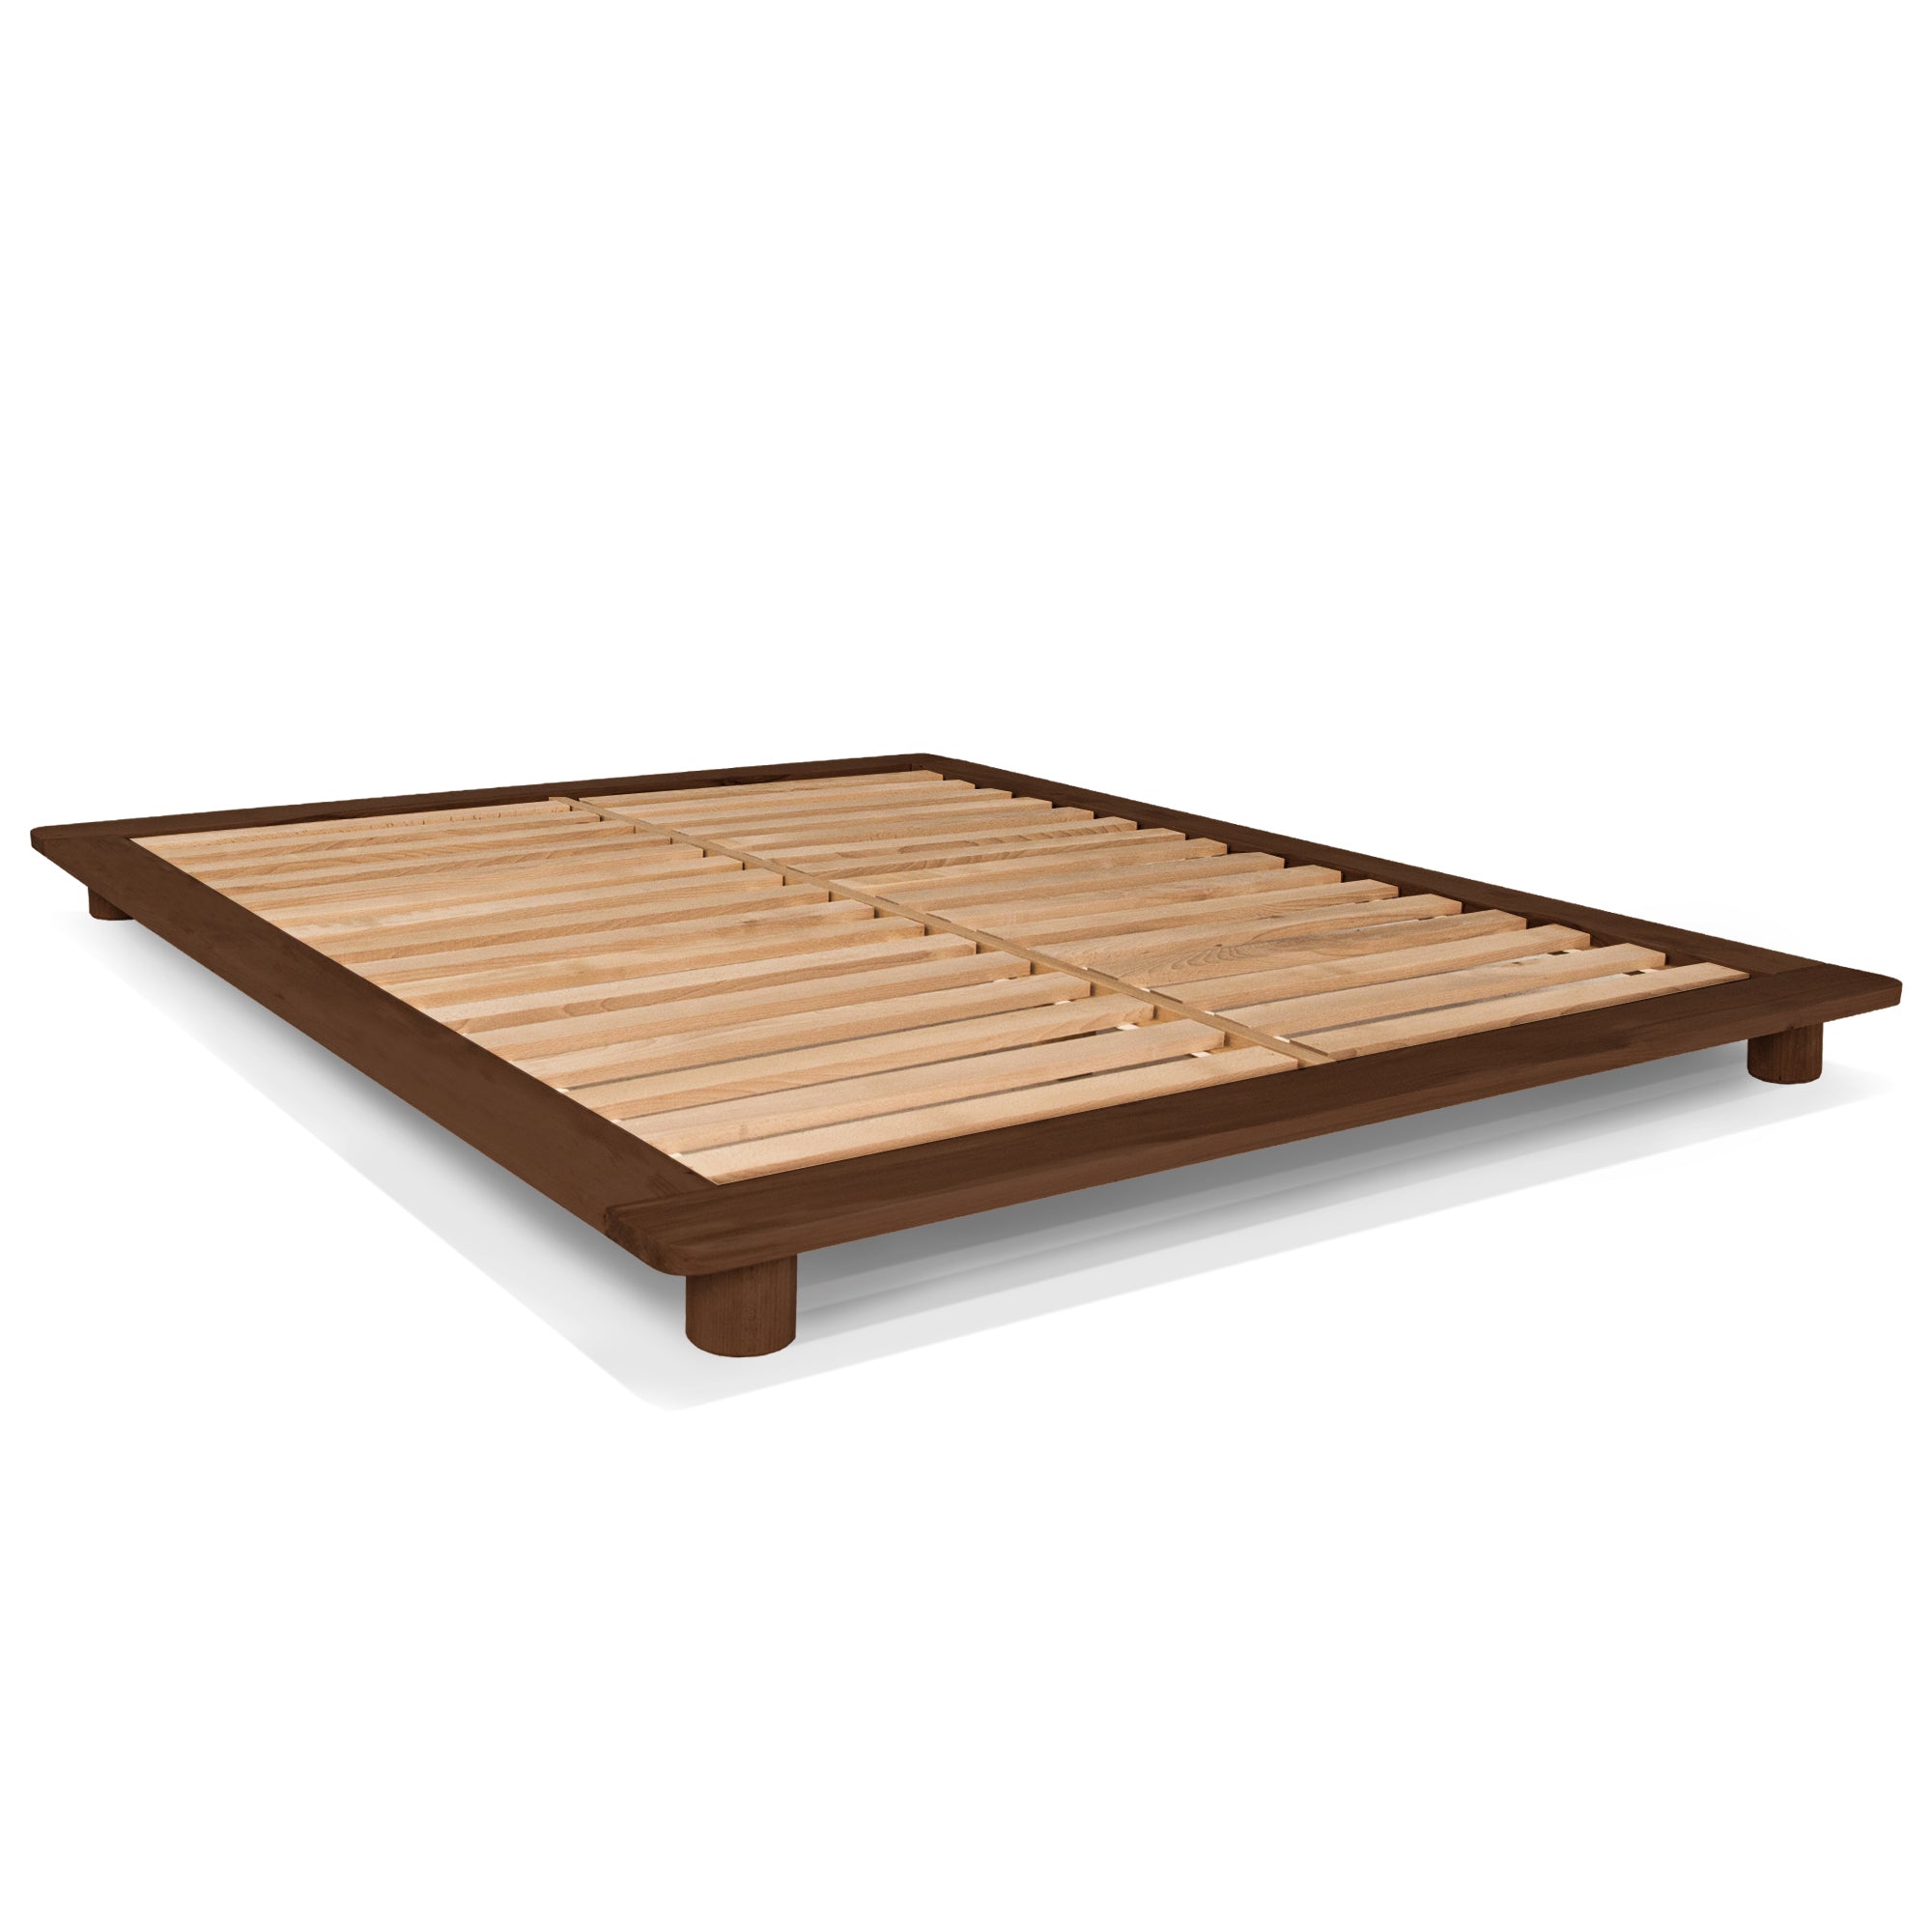 CONE Double Bed, Beech Wood -walnut frame without mattress